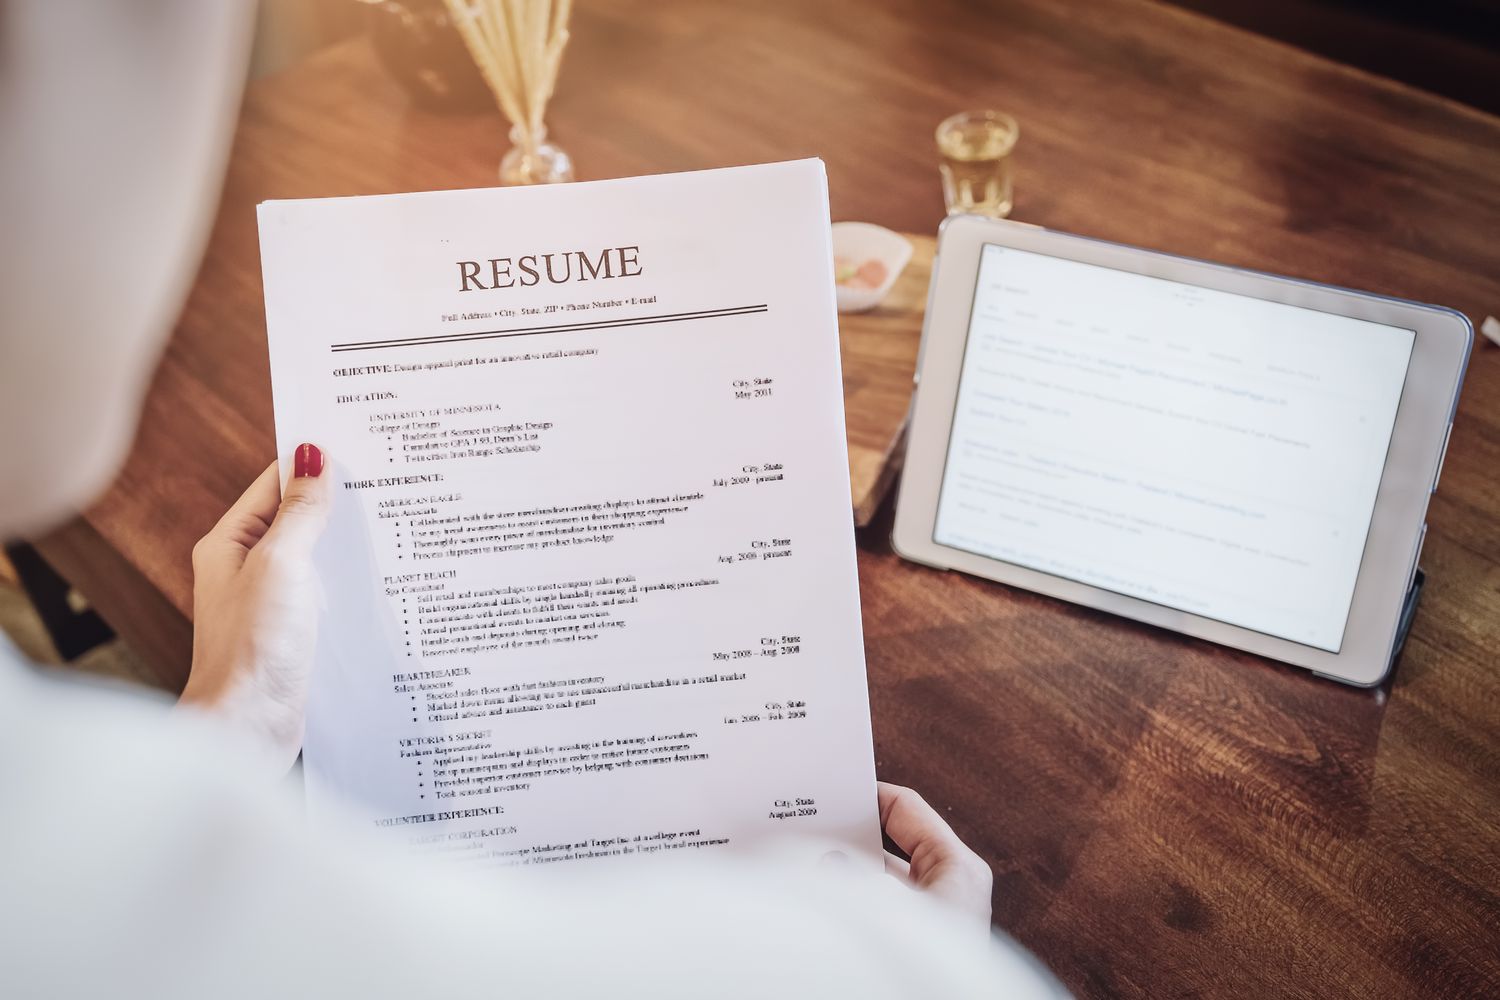 How To Write A Professional Resume For Employment?